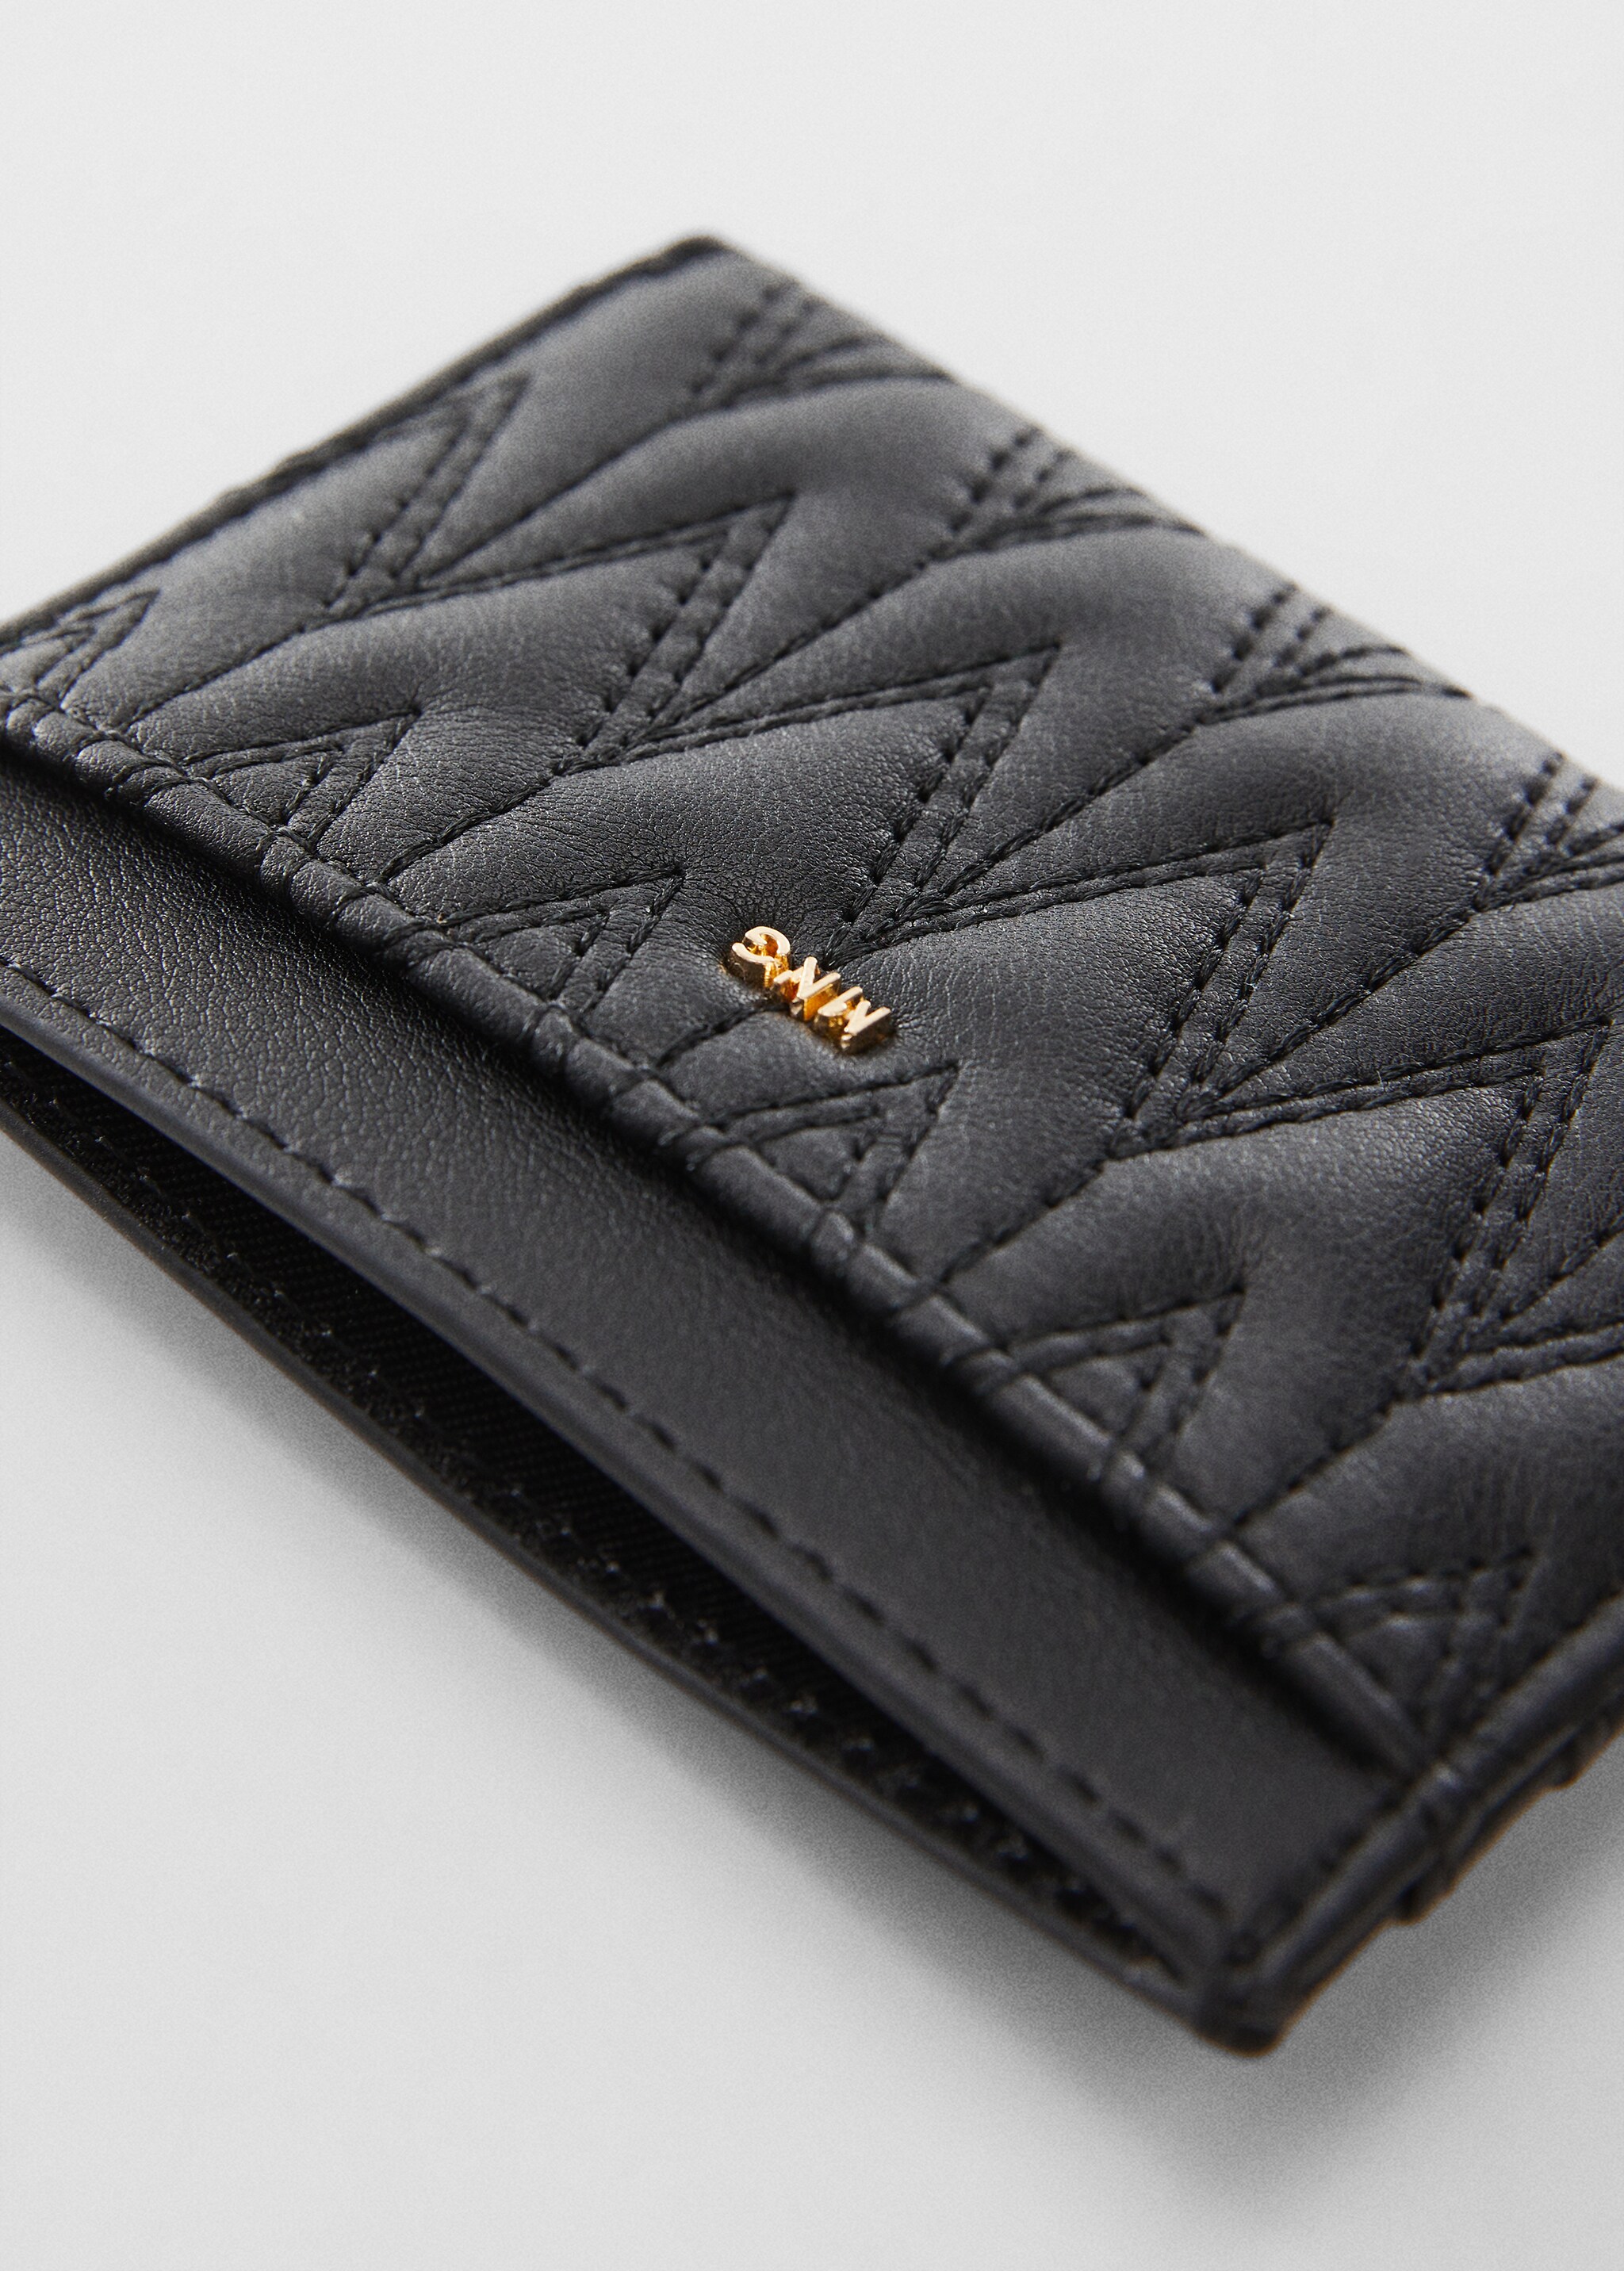 Quilted cardholder with logo - Medium plane